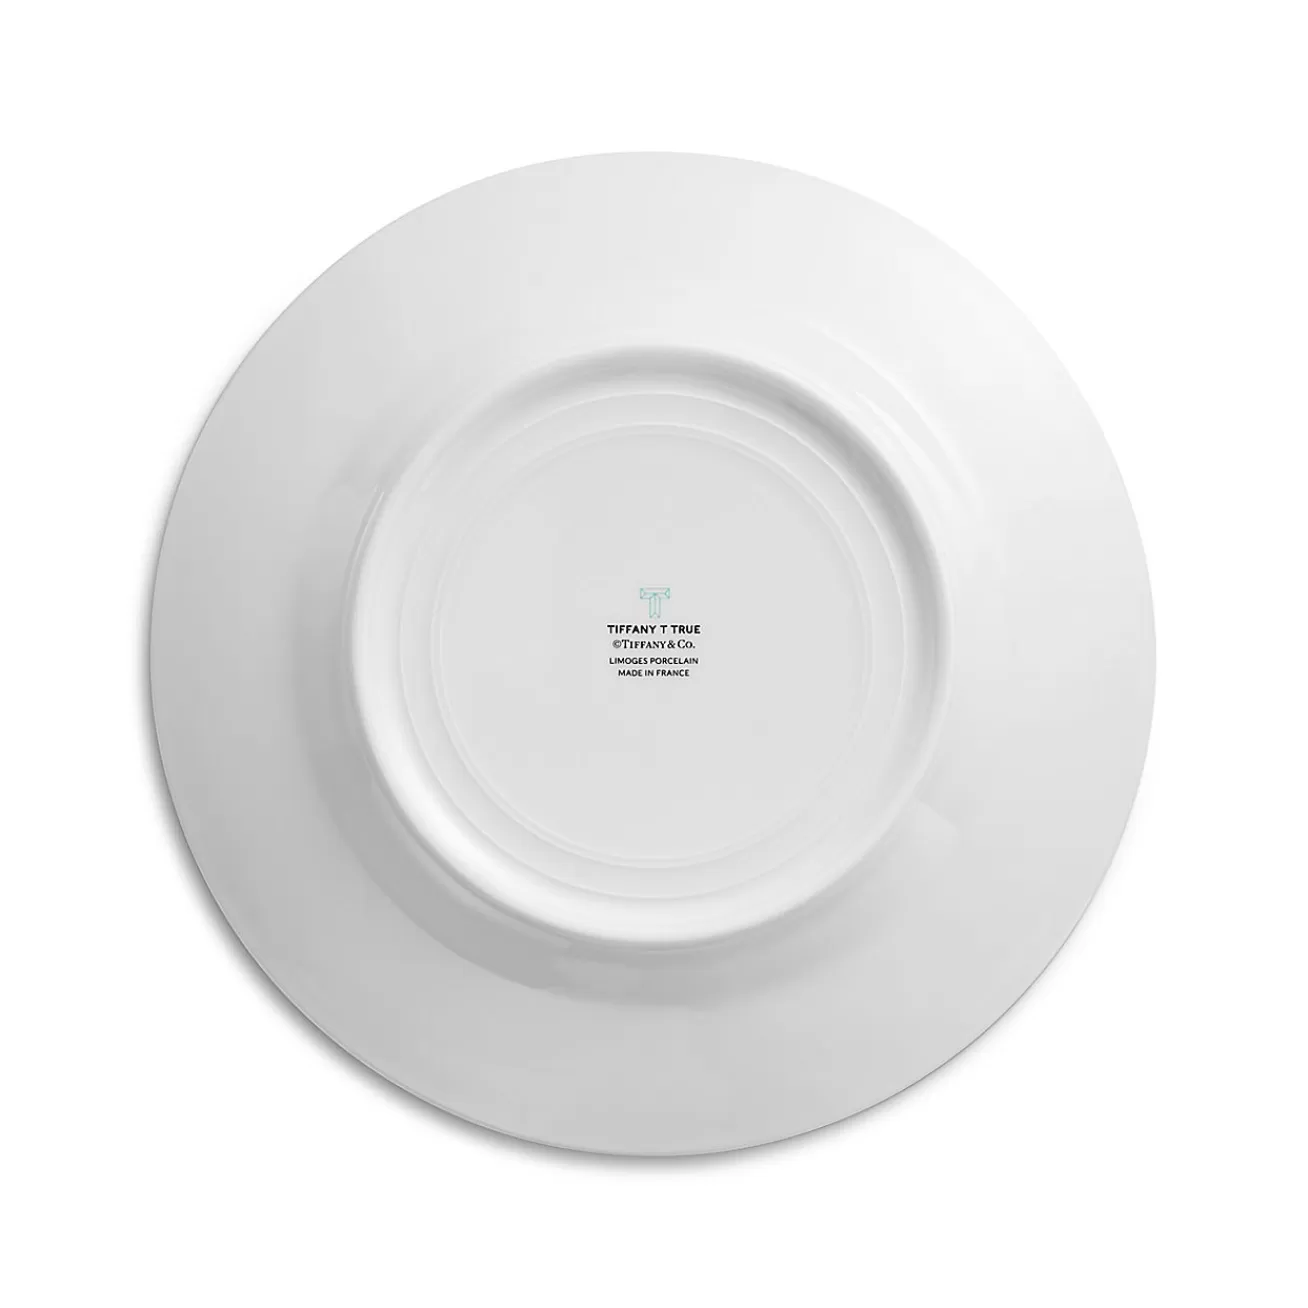 Tiffany & Co. Tiffany T True Dinner Plate with a Hand-painted Gold Rim | ^ The Home | Housewarming Gifts